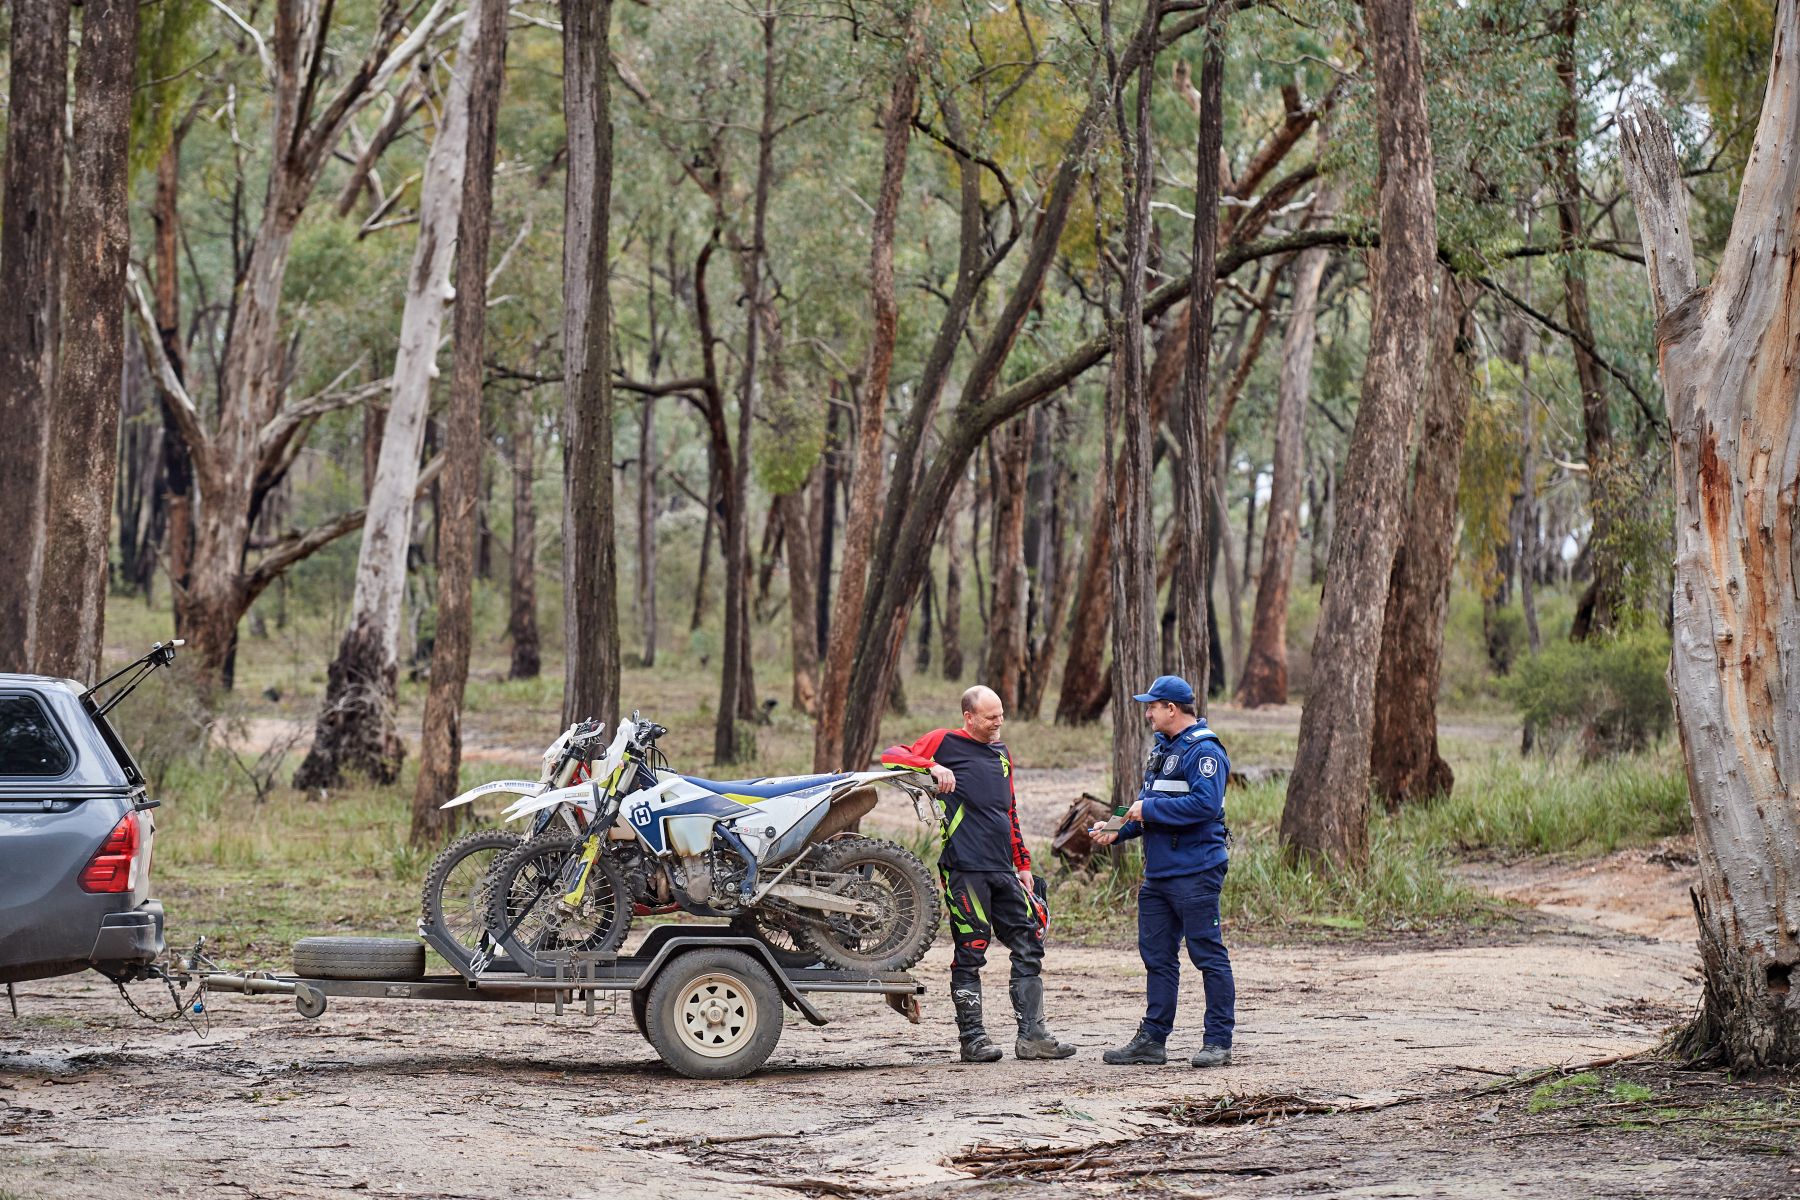 A trail rider with several bikes in a trailer speaks to an official in the bush